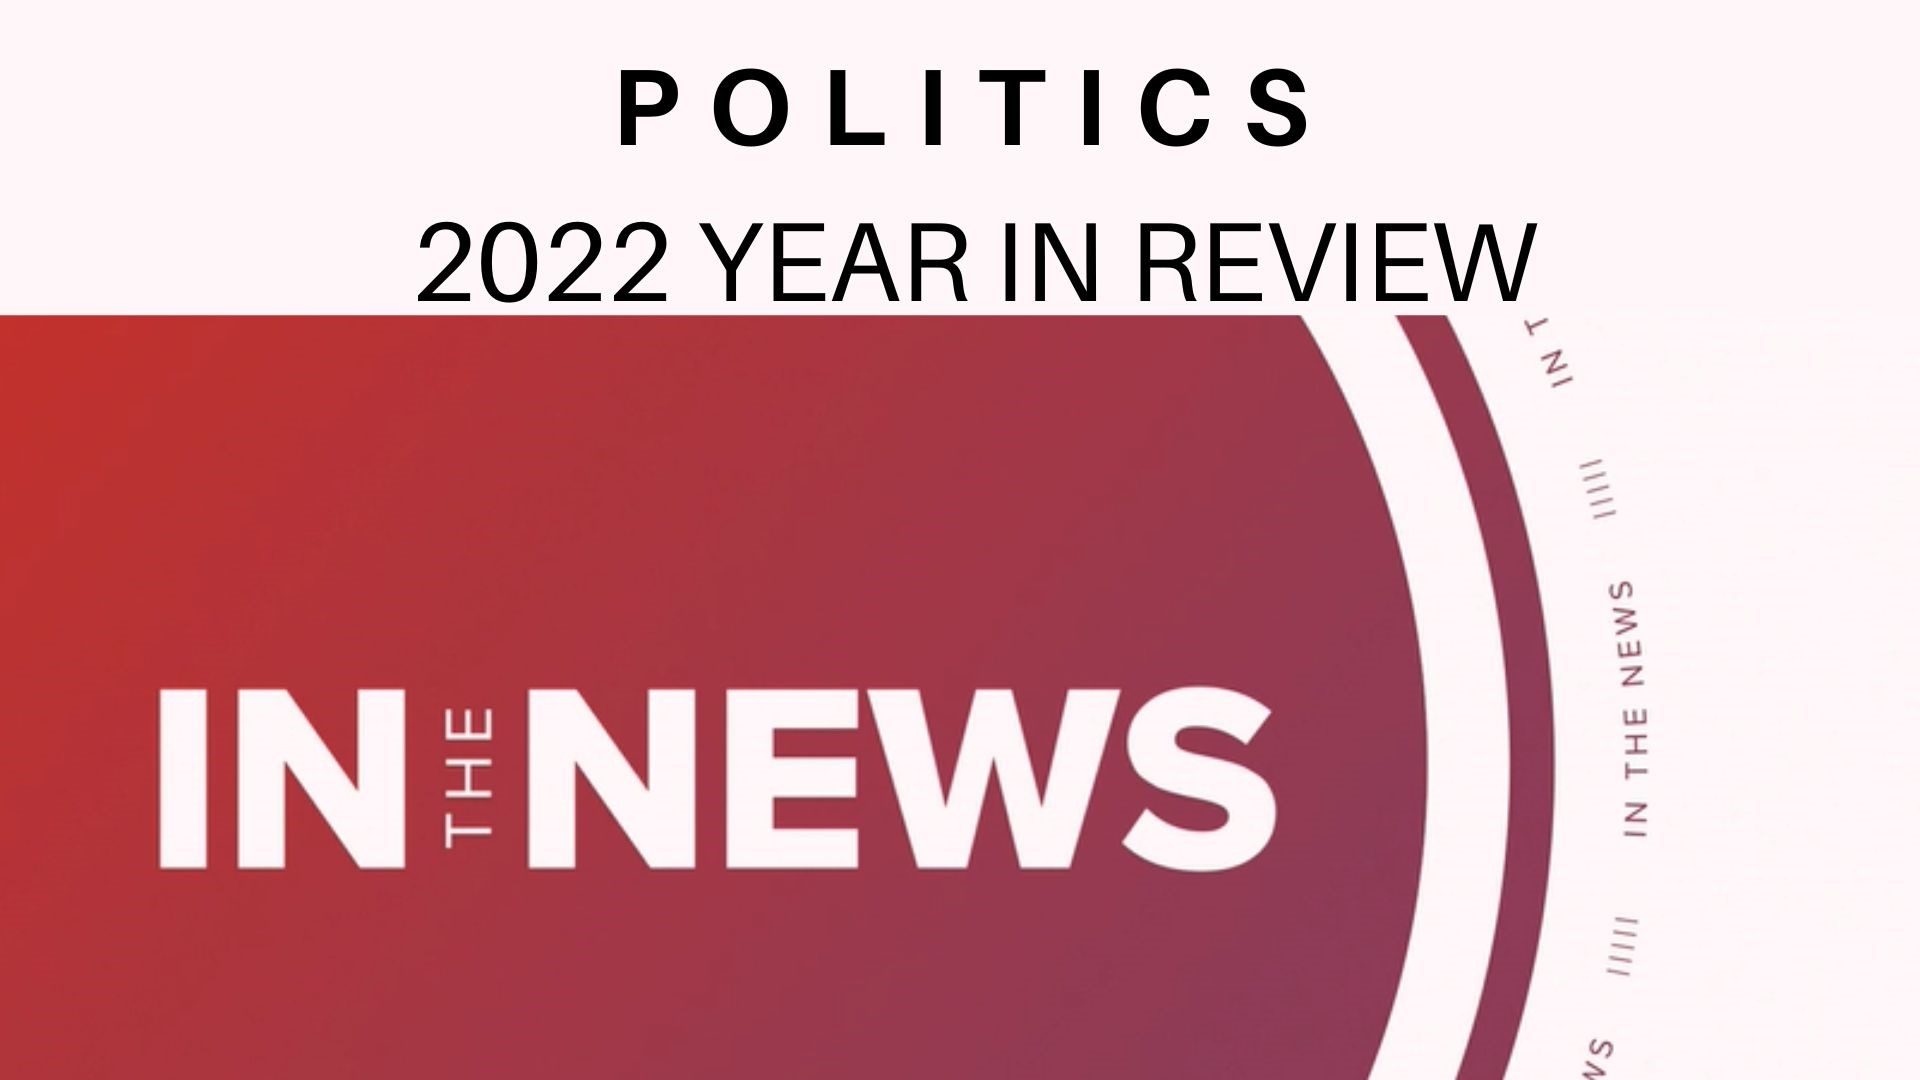 In the News takes a look back at the world of politics in 2022.